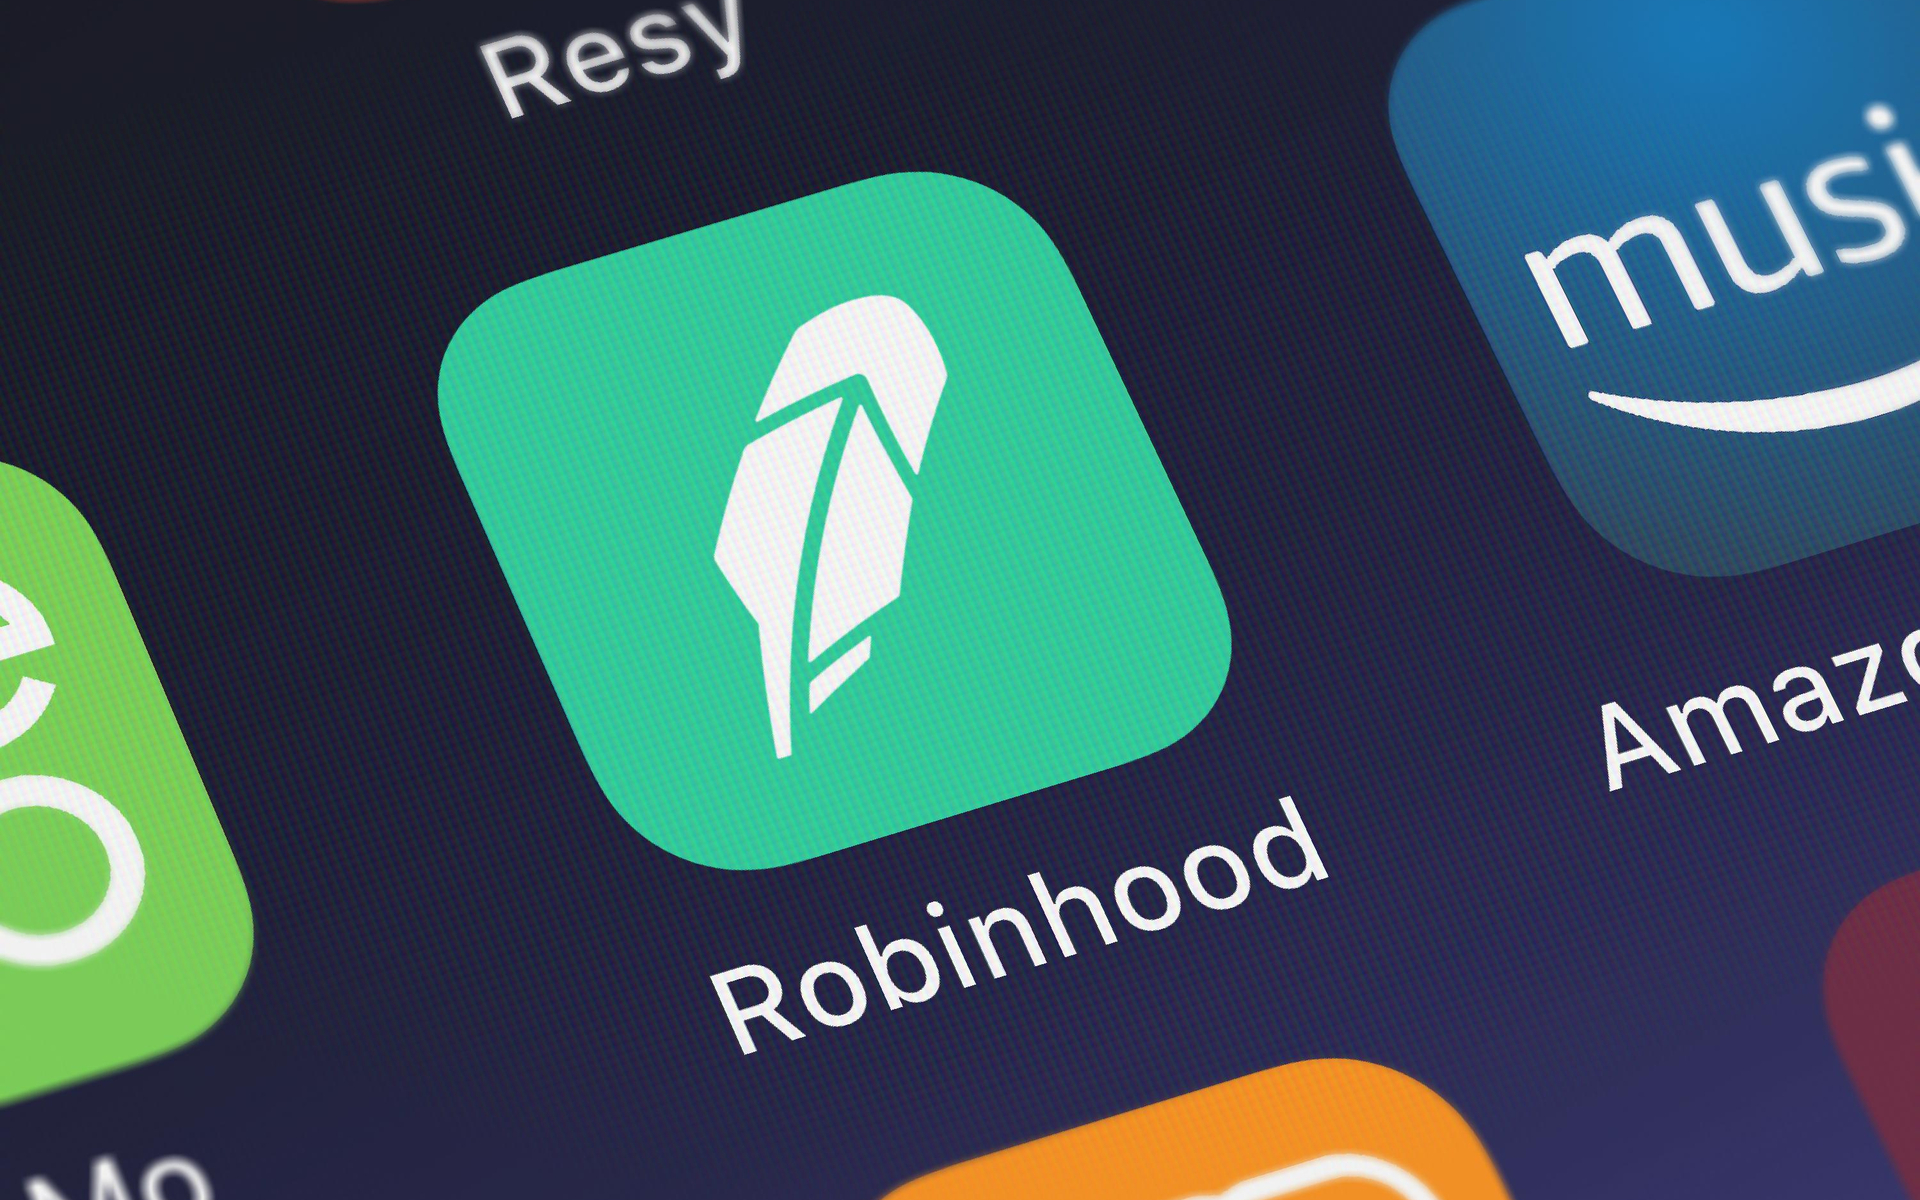 Robinhood app allows users to by fractional shares